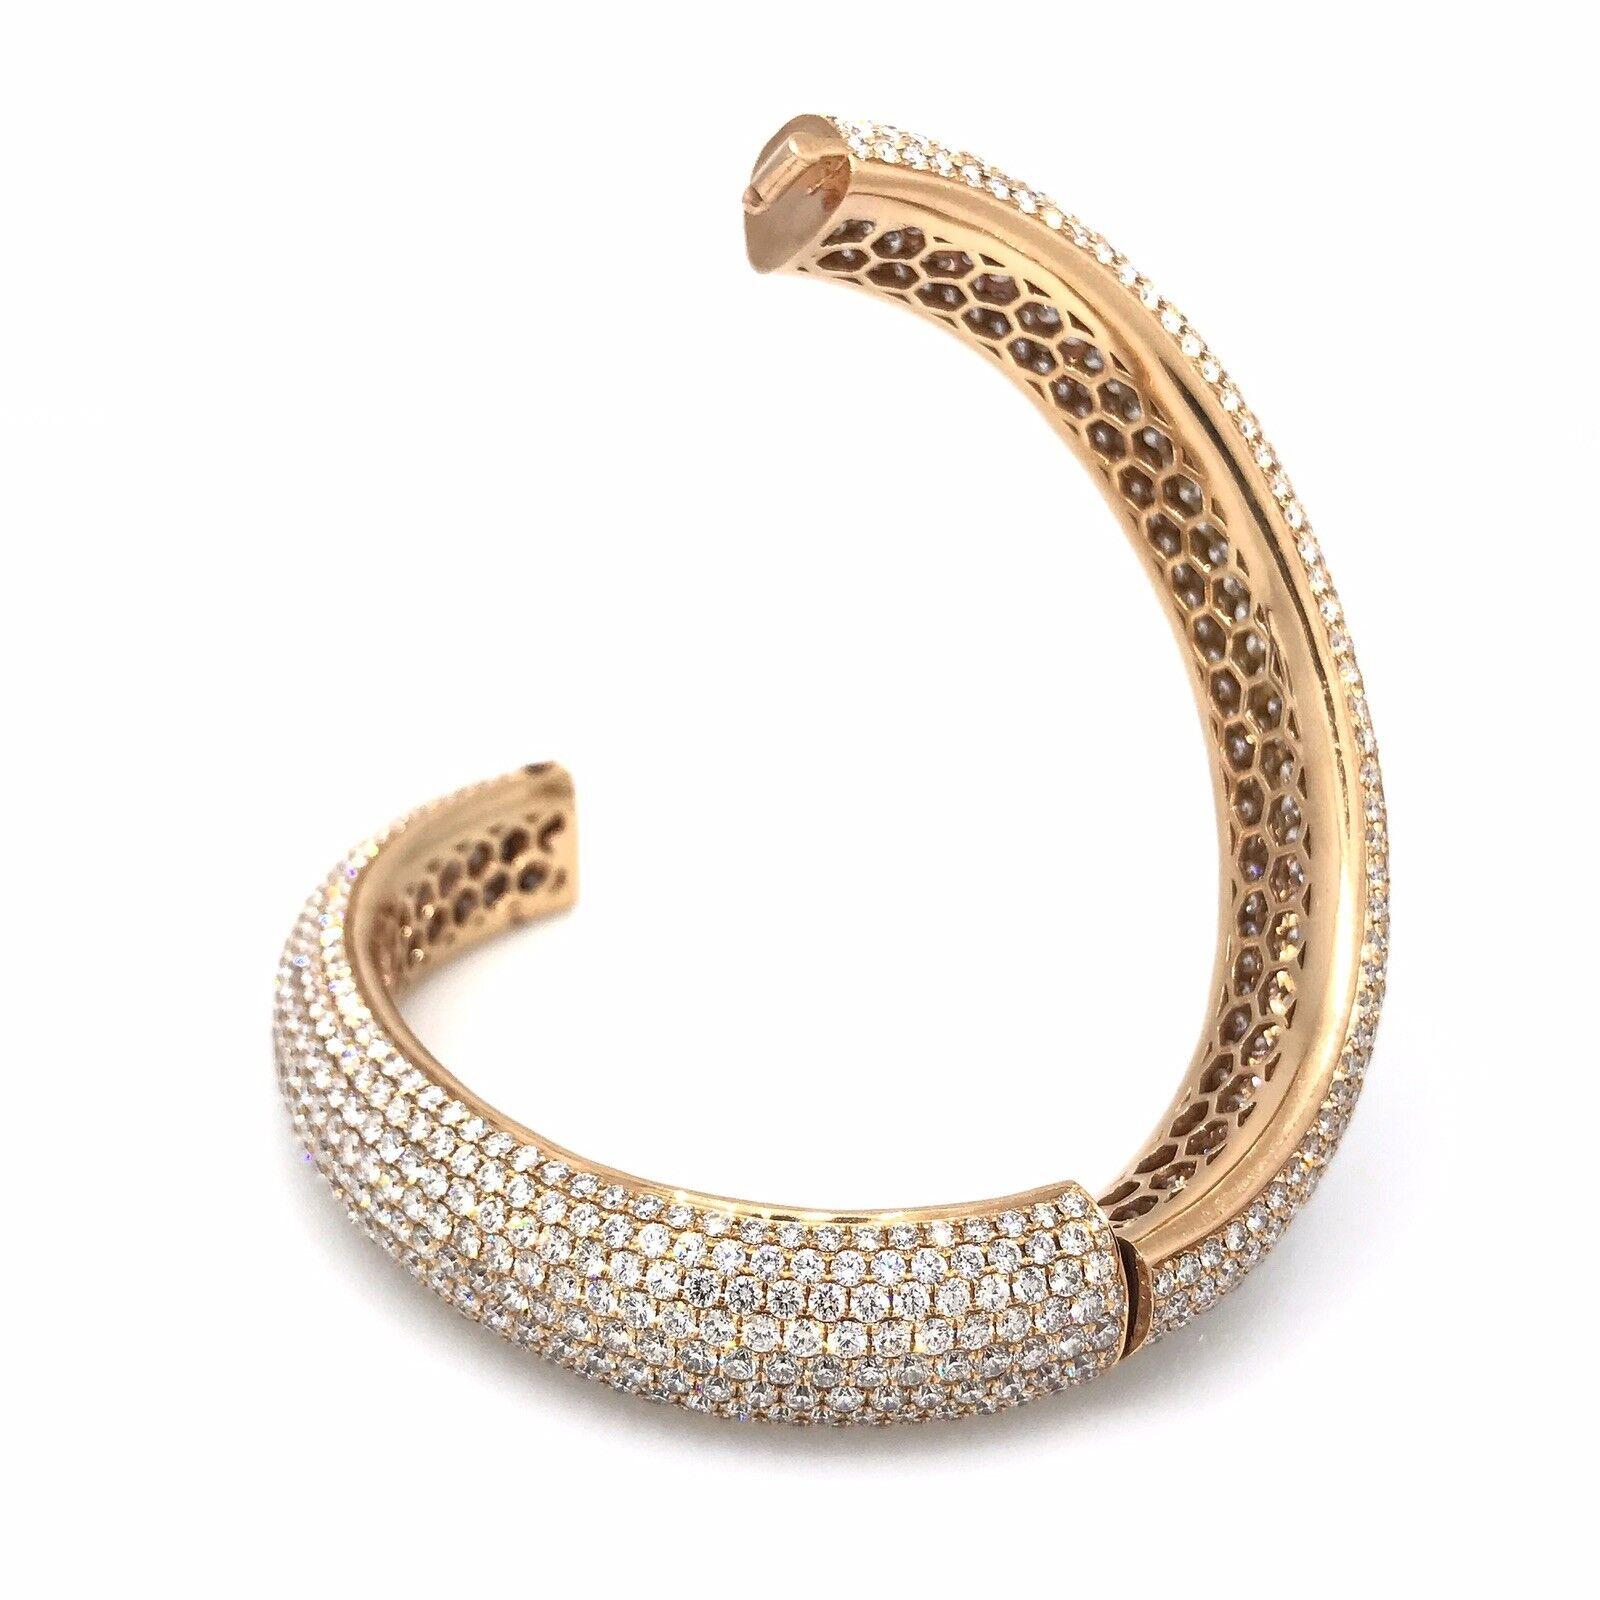 24.25 Carat Diamond Pave Bangle Bracelet in 18k Rose Gold

Fine Quality Oval Shaped Bangle Bracelet features 9 rows of Round Brilliant diamonds, pave set all around the bangle in 18k Rose Gold.
Diamond weight for the entire bracelet is estimated at